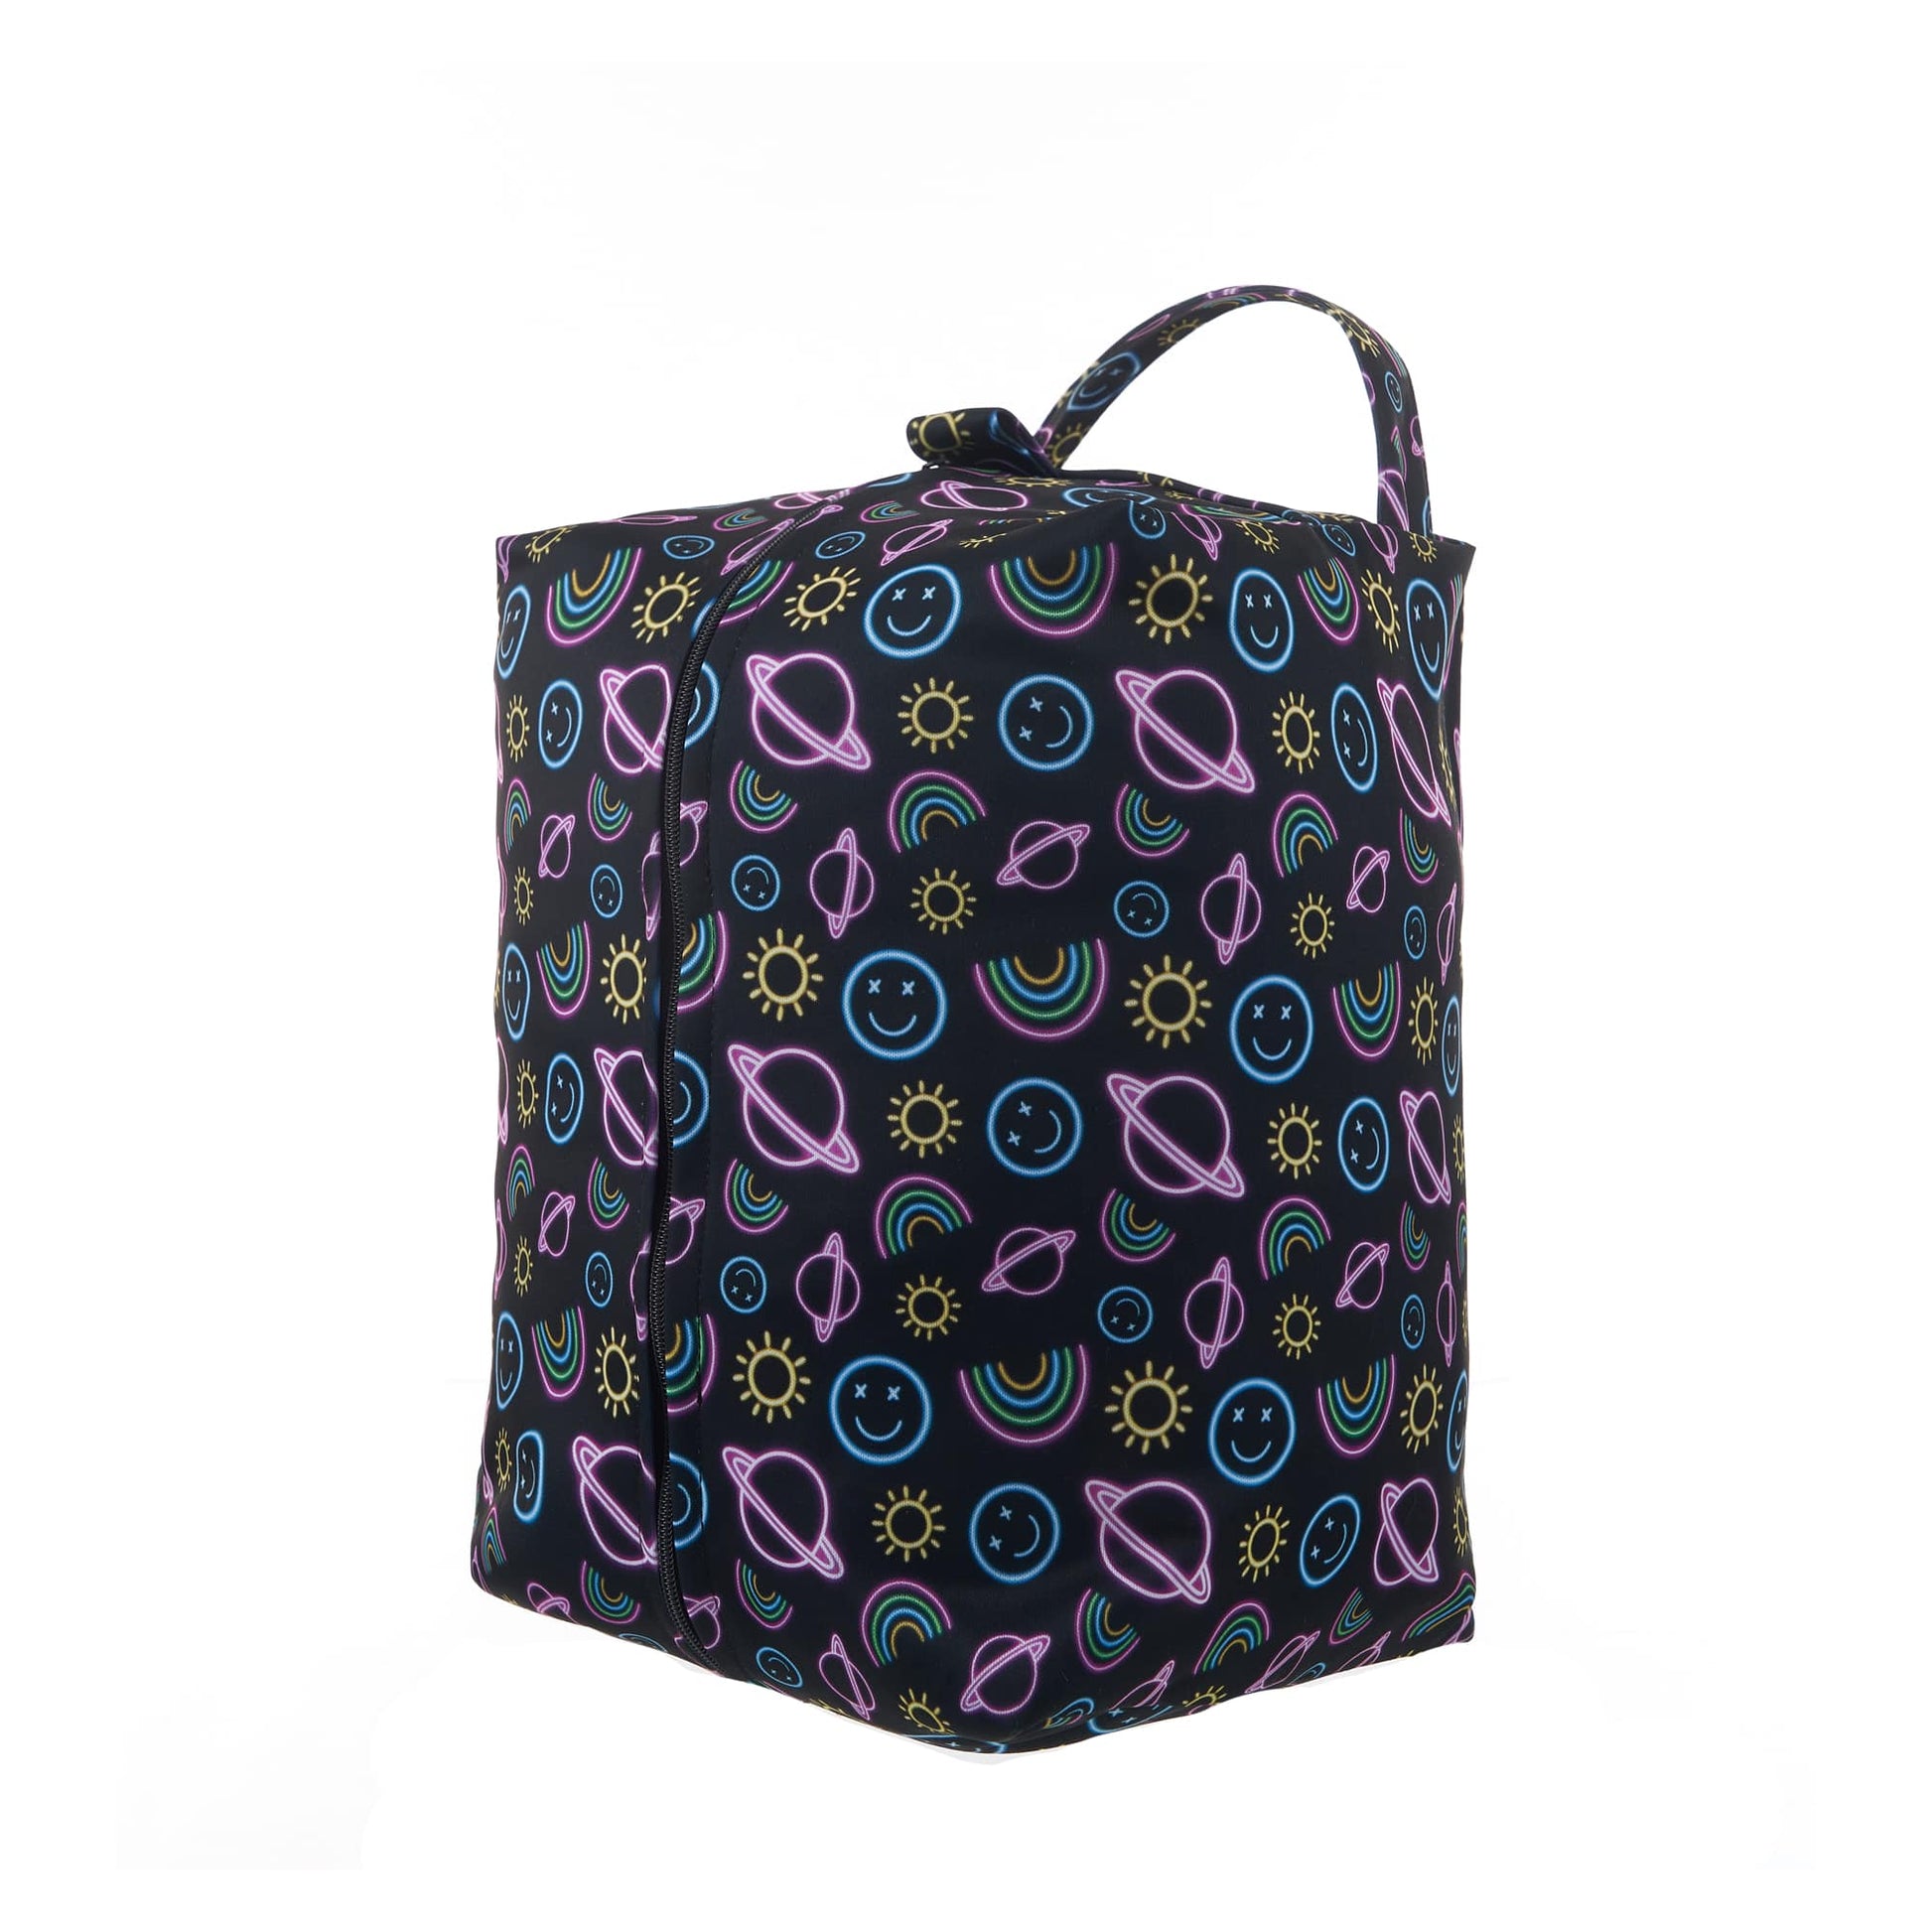 Reusable cloth nappy pod with neon space pattern.